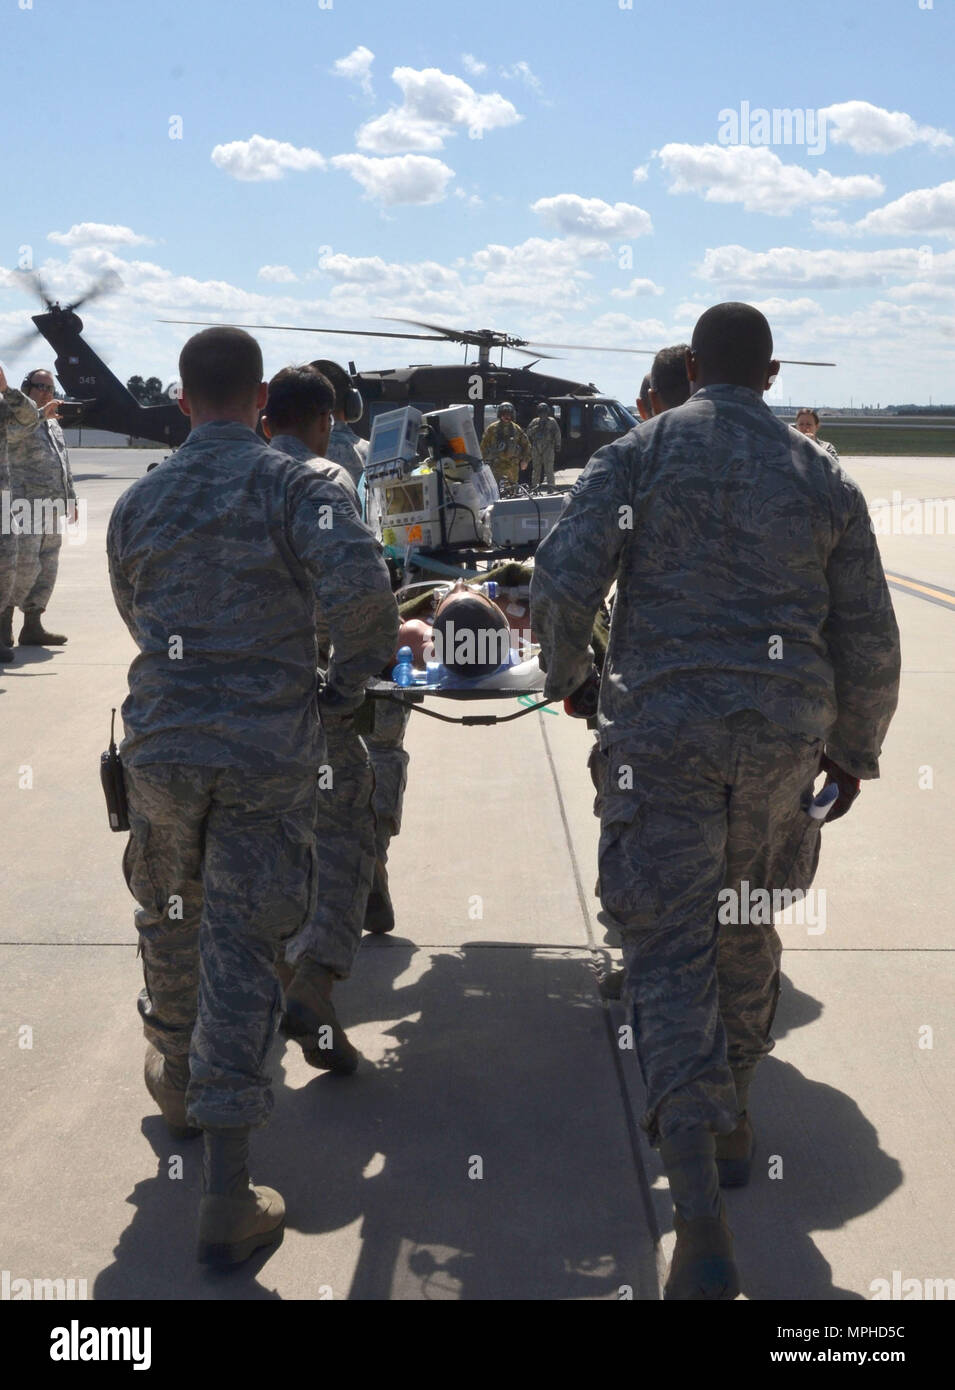 A team of Air Force Reserve rescue medics load a simulated patient connected to an extracorporeal membrane oxygenation machine onto an Army National Guard UH-60 Black Hawk helicopter March 4, 2017 at Patrick Air Force Base, Florida, as part of the 5th annual MEDBEACH joint medical response exercise. More than 250 military medics from 12 units across the country participated in this year's exercise. (U.S. Air Force photo/Capt. Leslie Forshaw) Stock Photo